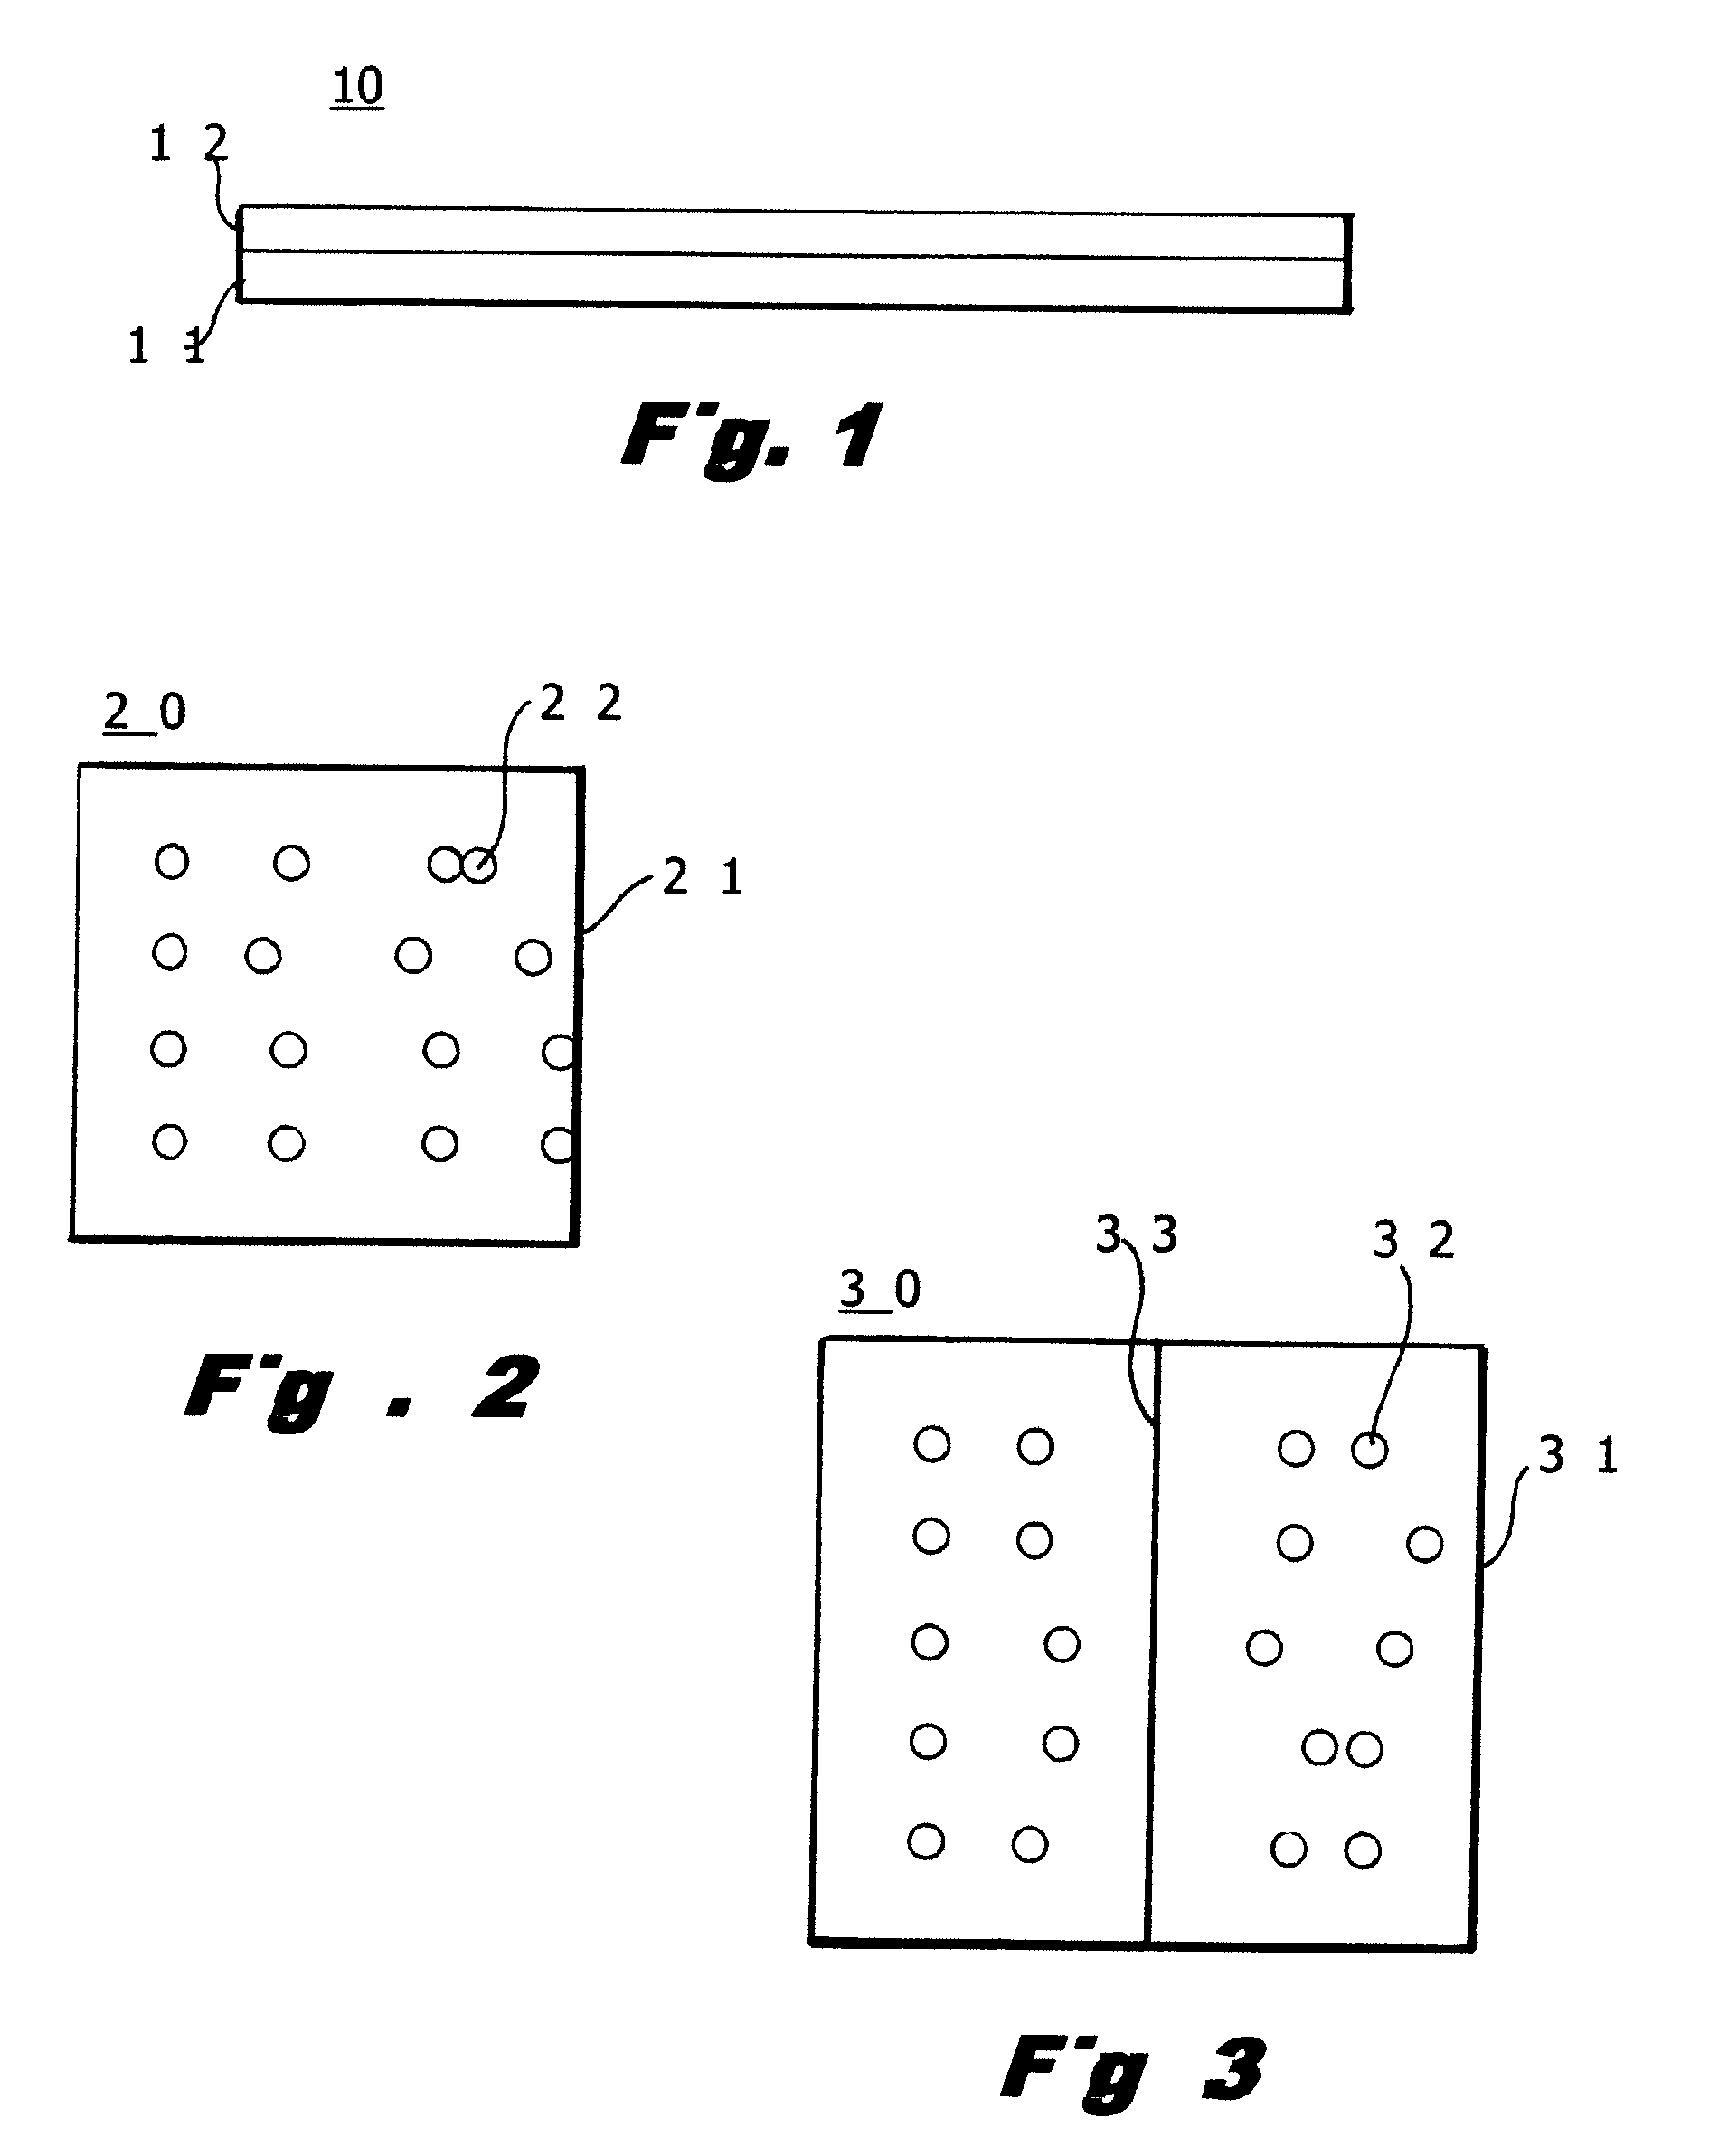 Wallboard Tape And Method Of Using Same